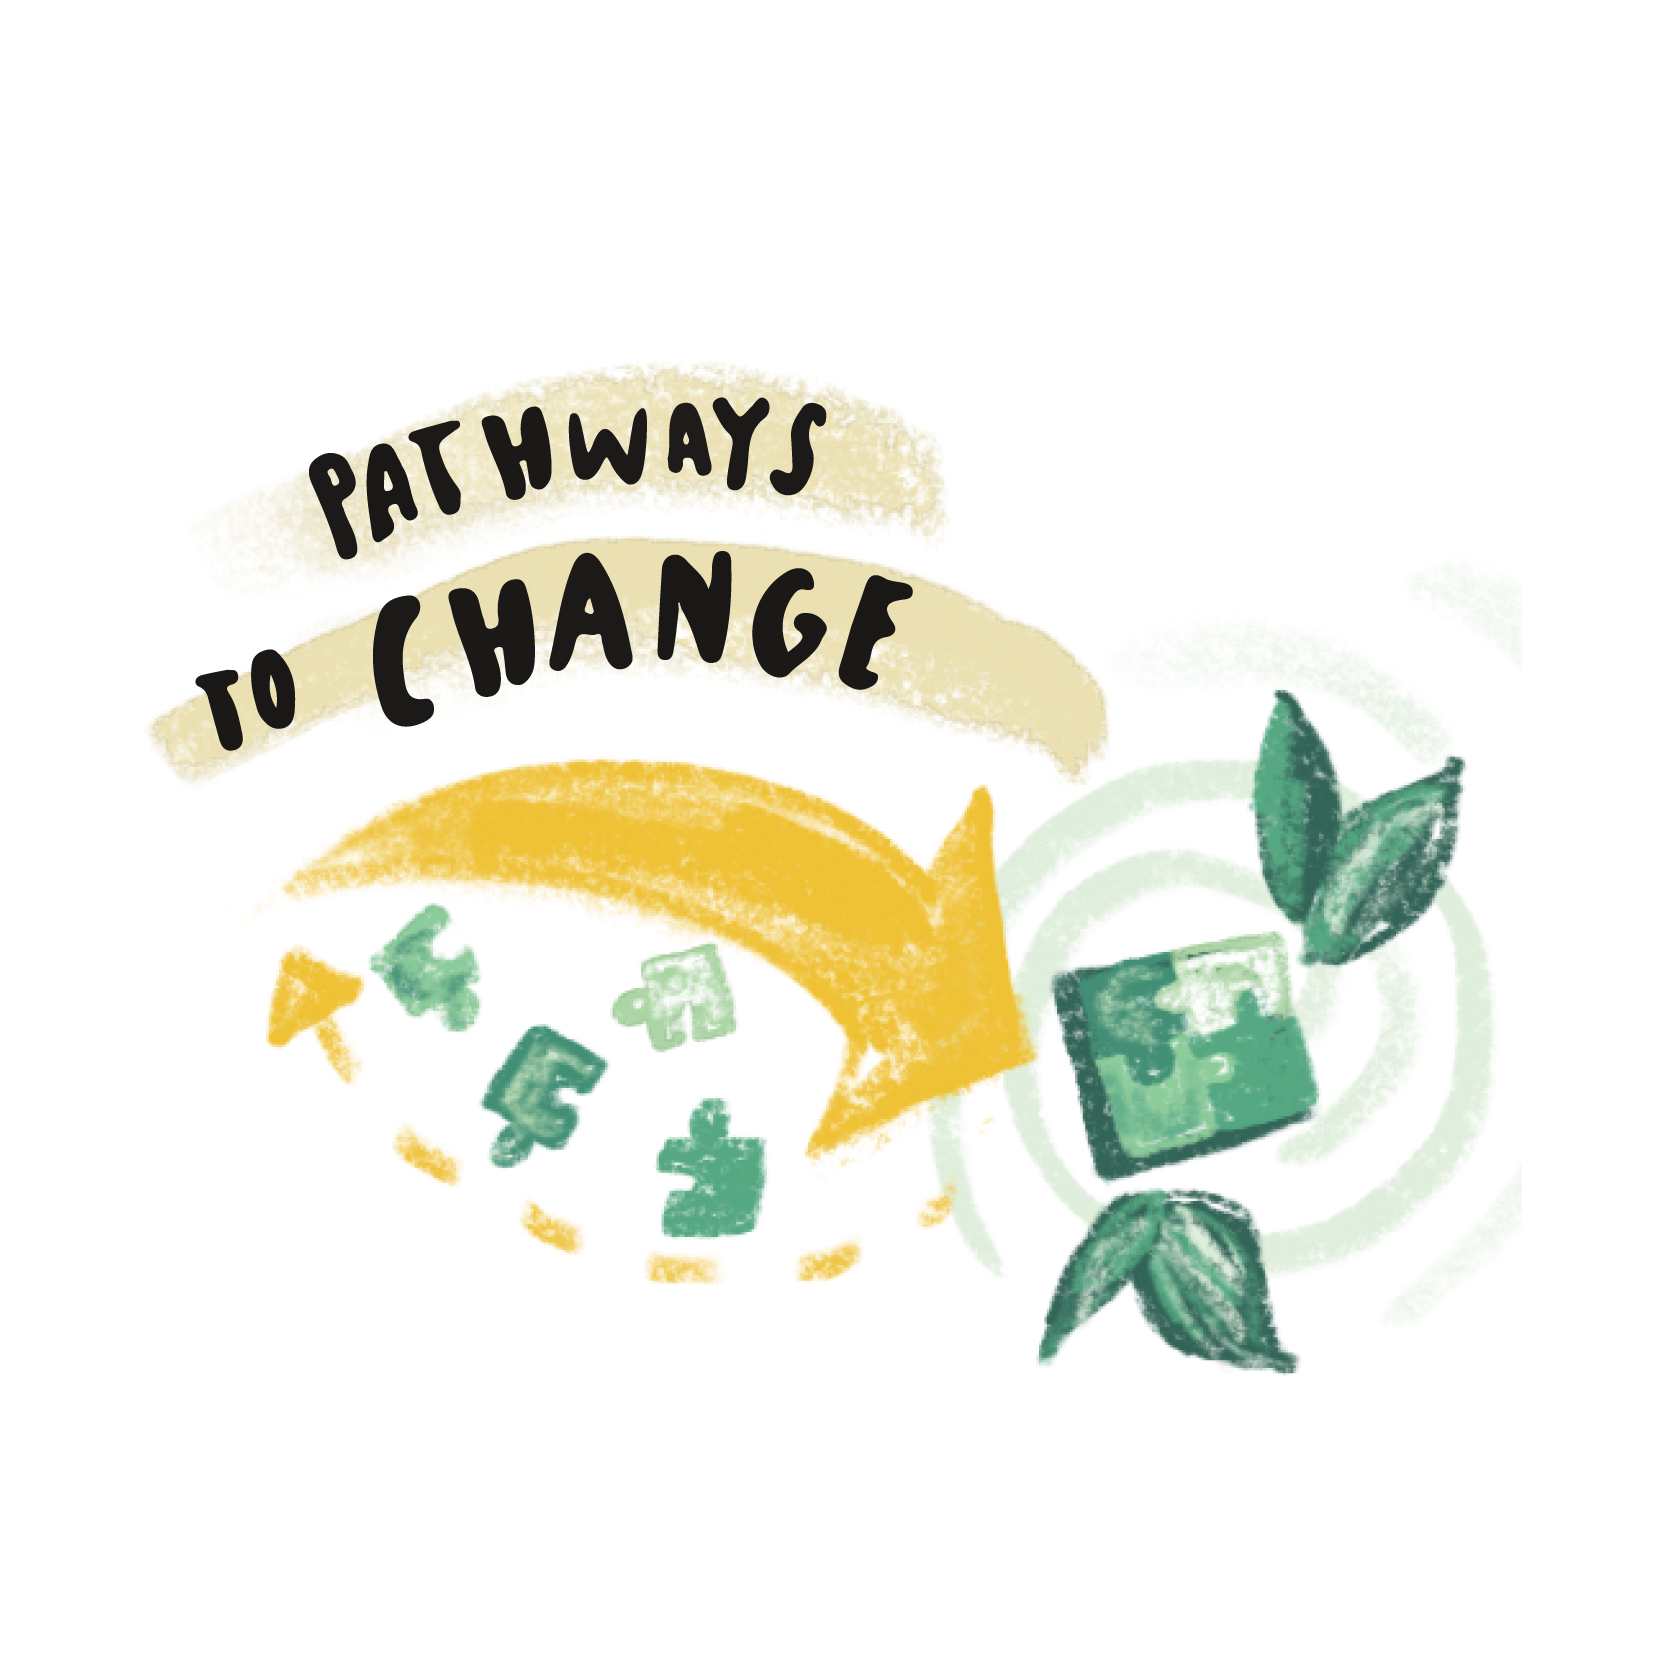 Pathways to change.png